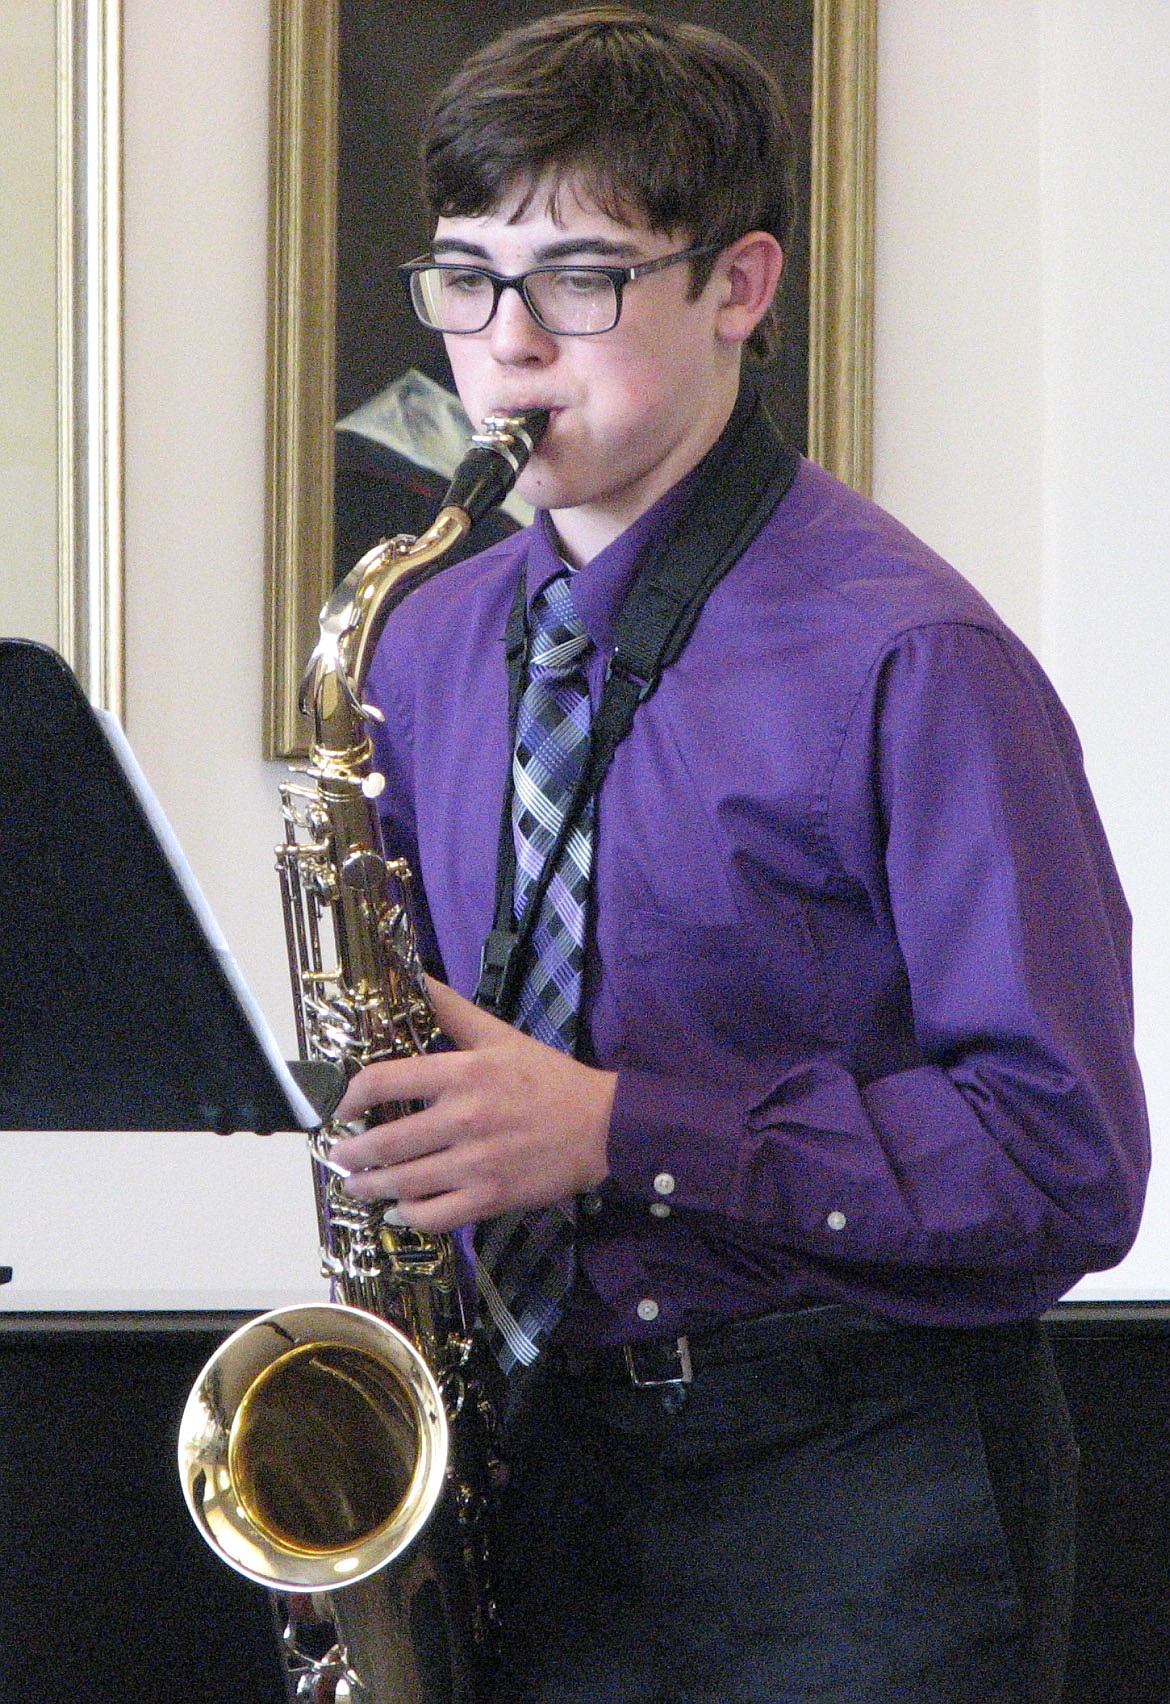 Trey Thompson, tenor sax, performs during state competition May 5-6 in Missoula. (Courtesy Photo)